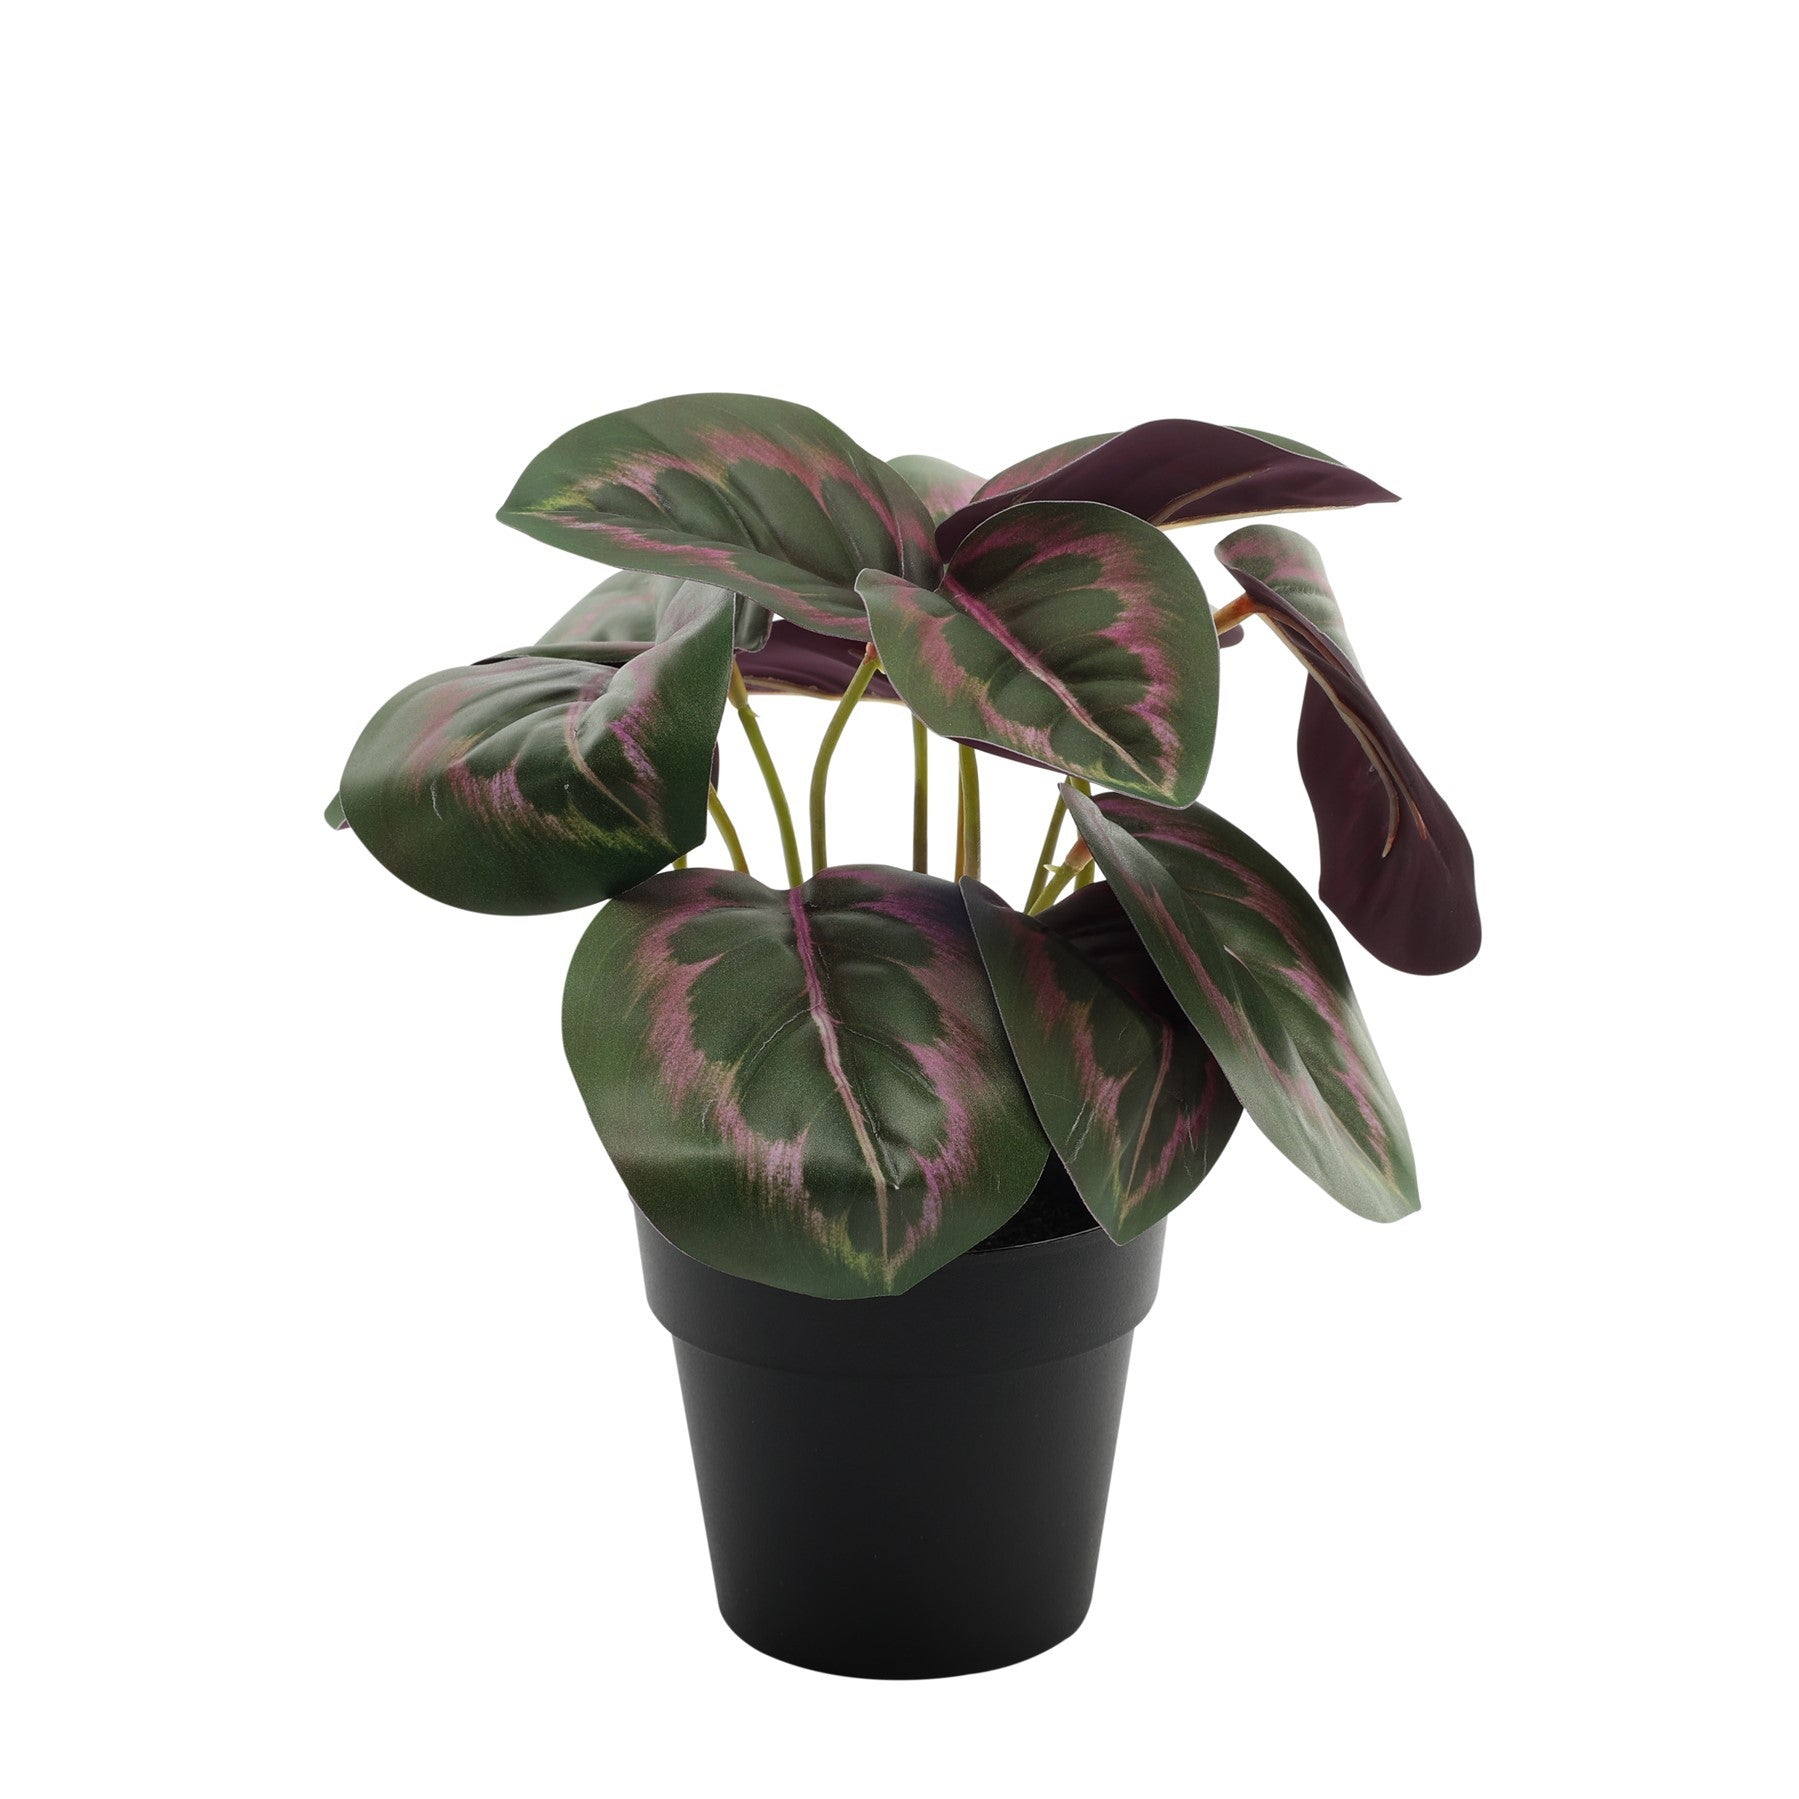 View Dark Calathea Potted House Plant 22cm information